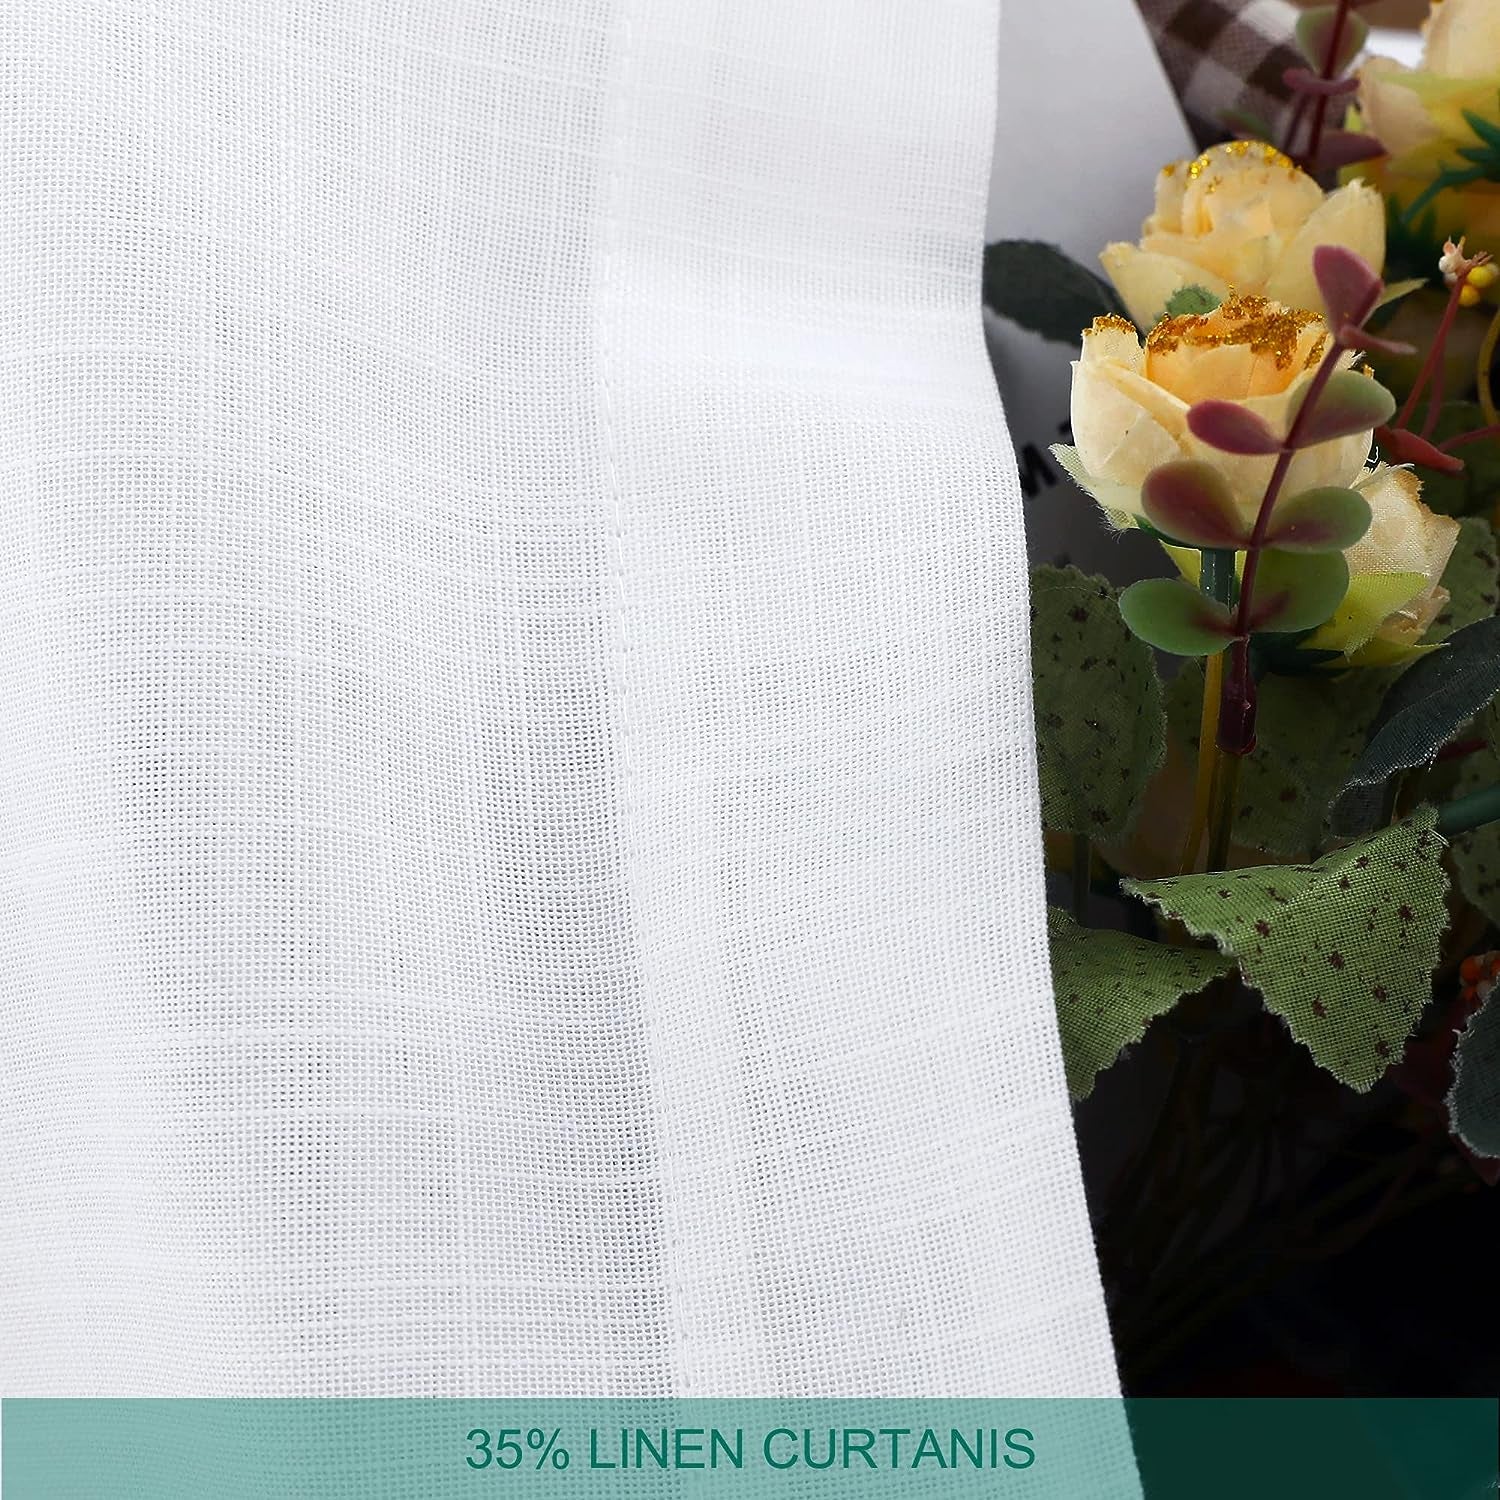 Pure White Linen Curtains 84 Inch Long Back Tab Loop Pocket Drape Cotton Textured Curtains 2 Panels Set Light Filtering Semi Sheer Linen Curtain for Living Room Bedroom Farmhouse 52X84  Hoydumuia   